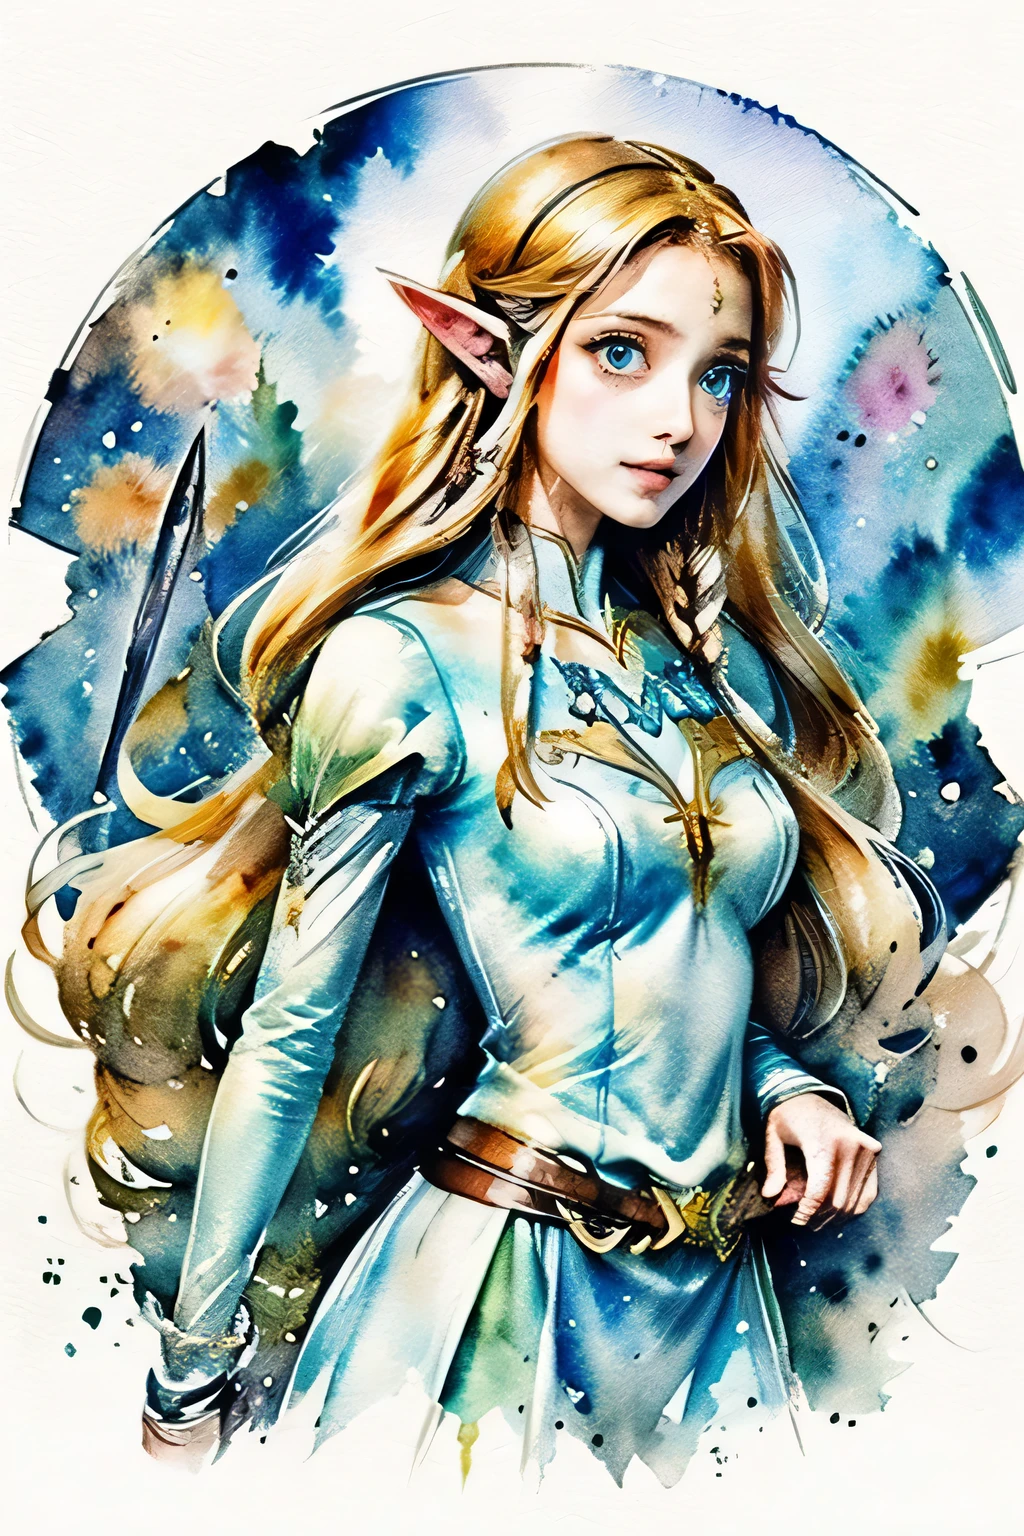 zelda style art, elf princess knight, Intense watercolor painting, detailed watercolor art, watercolor splash, surreal, beautiful and expressive painting, beautiful artwork illustration, vibrant colors sharp illustration, a drawing of a woman with long hair holding a sword, botw style, zelda botw, elf princess, elf girl, alluring elf princess knight, by Ryan Yee, from legend of zelda, anime fantasy illustration, highly detailed exquisite fanart, beautiful celestial mage, princess zelda, from bravely default ii, 